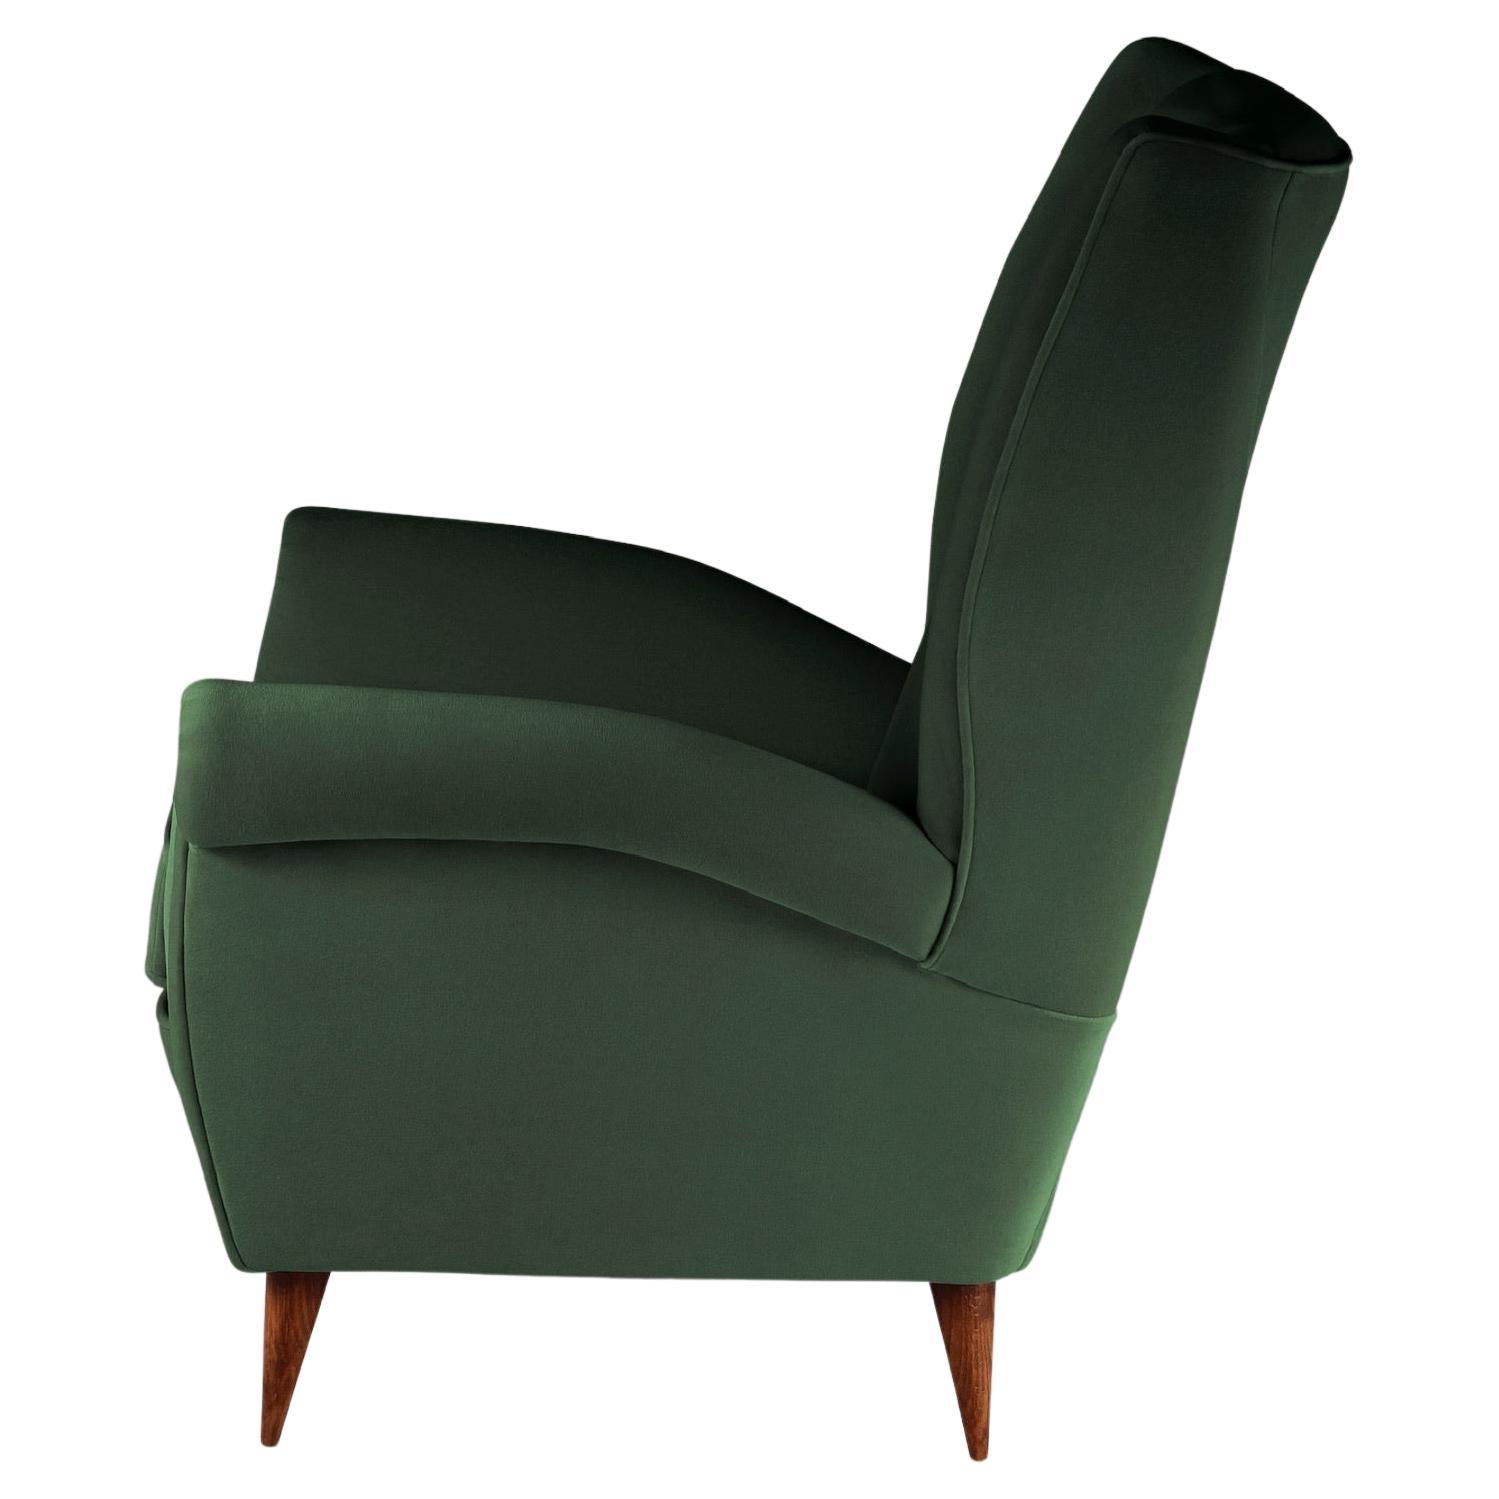 Pair of Mid-Century Modern Inspired Italian Style ‘Marcello’ Lounge Chairs For Sale